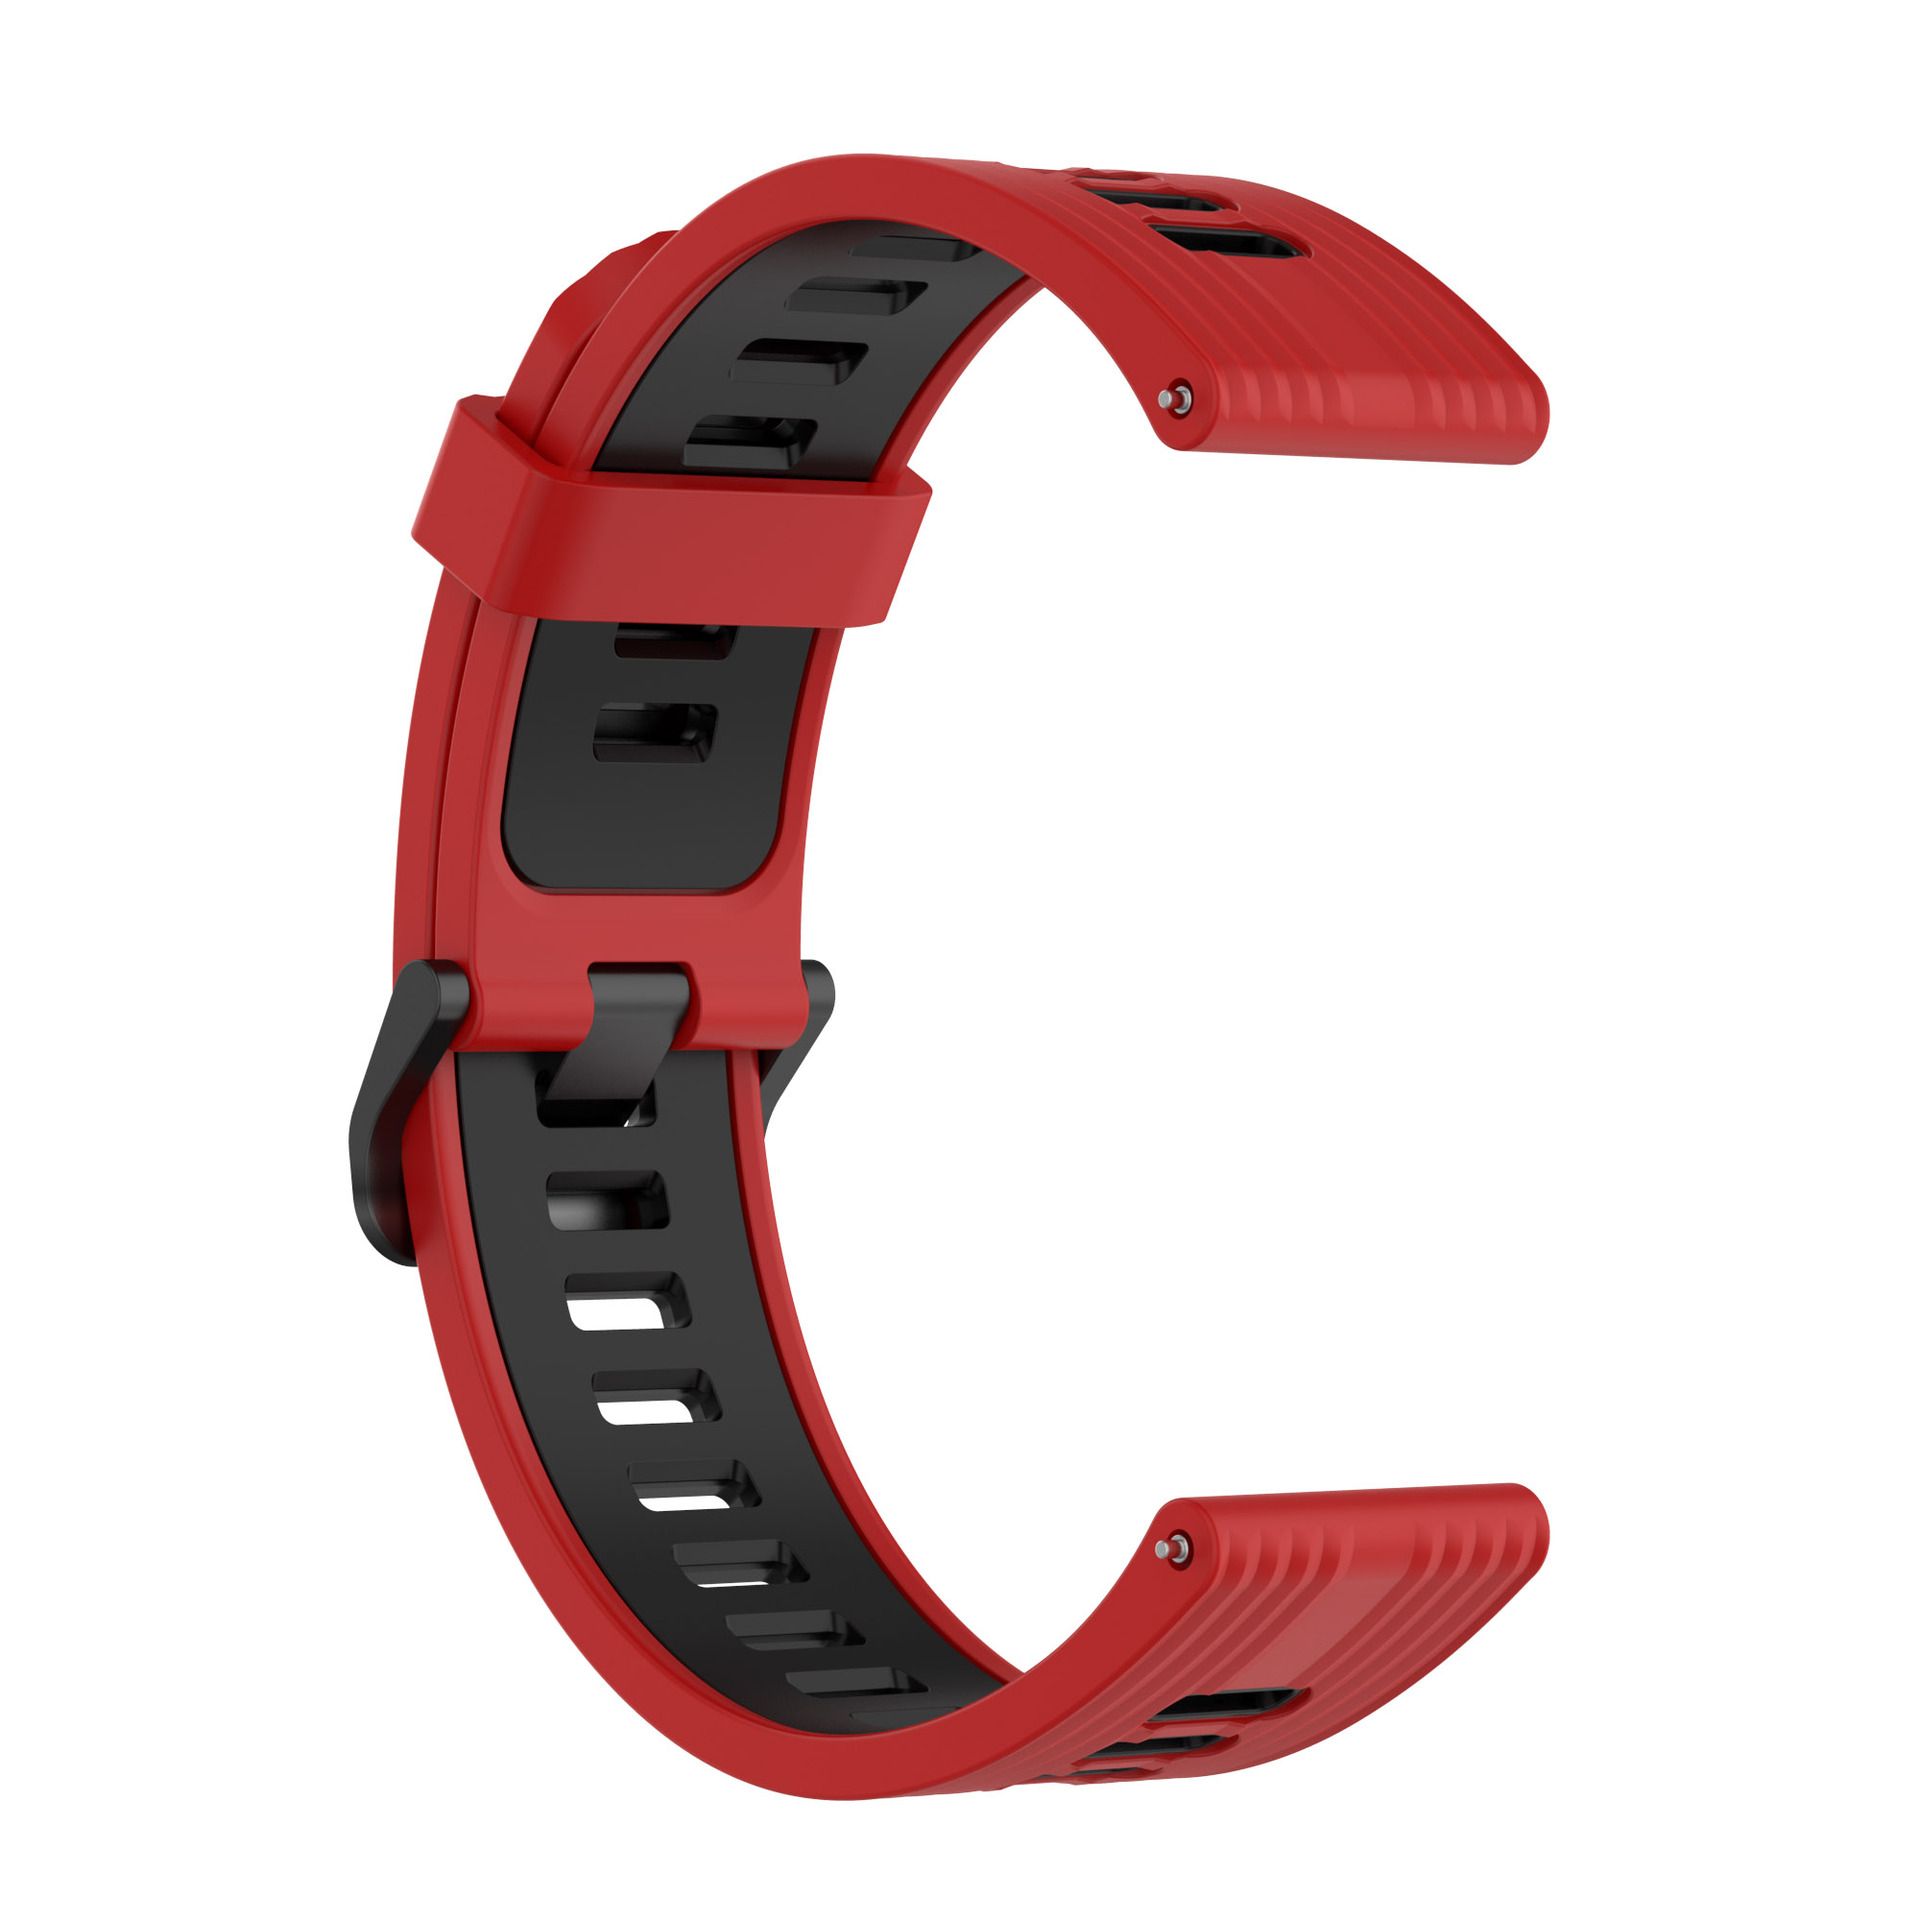 Bakeey-2022mm-Width-Comfortable-Breathable-Sweat-proof-Soft-Silicone-Watch-Band-Strap-Replacement-fo-1926926-18